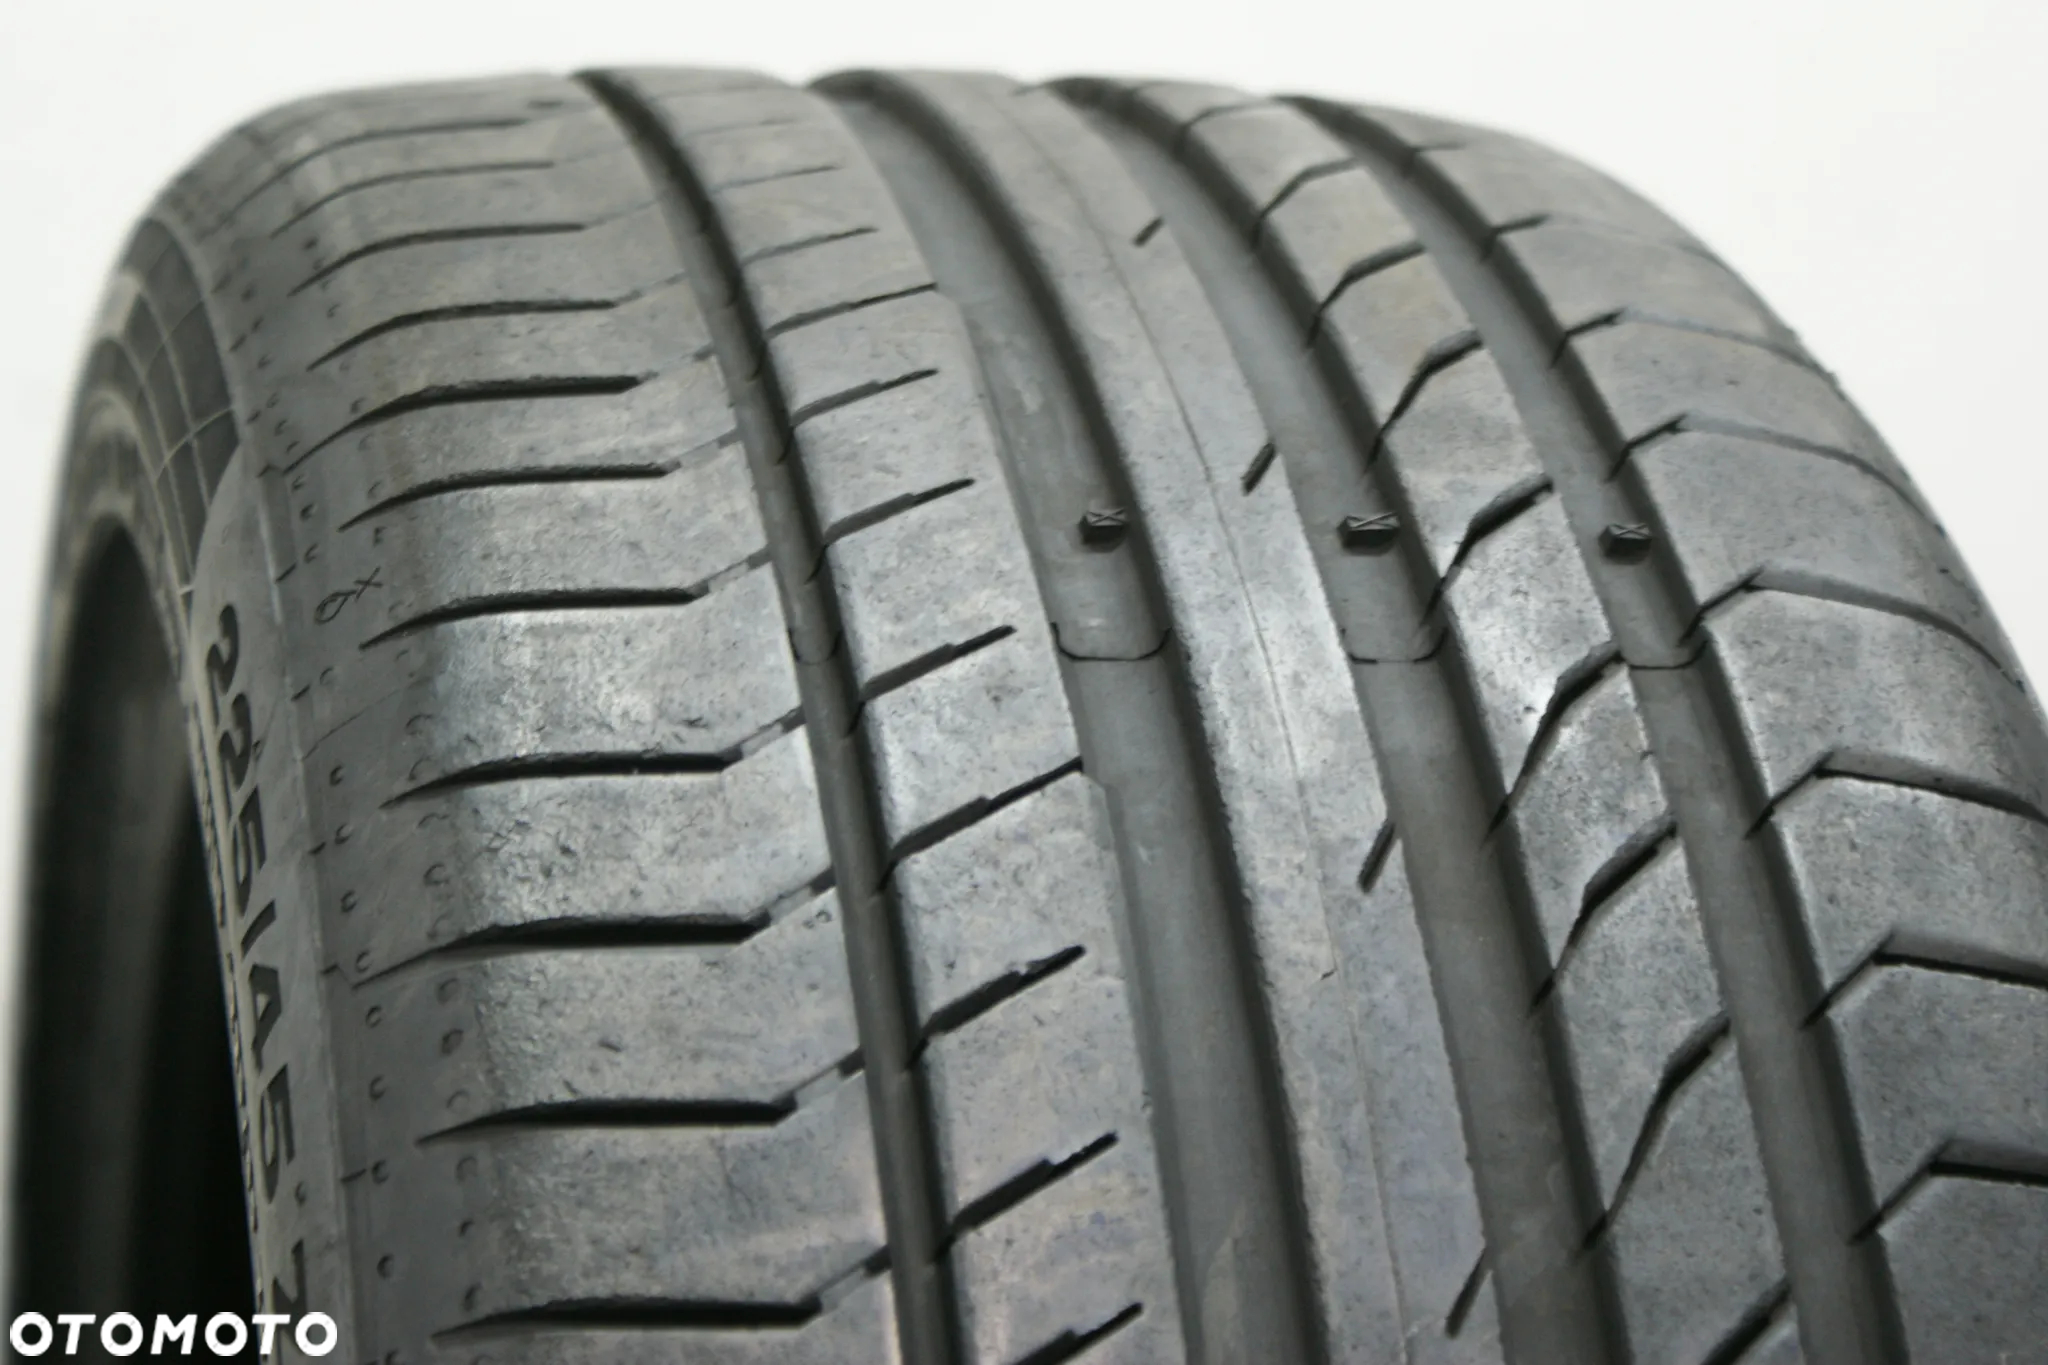 225/45R18 CONTINENTAL CONTISPORTCONTACT 5P  7mm - 2